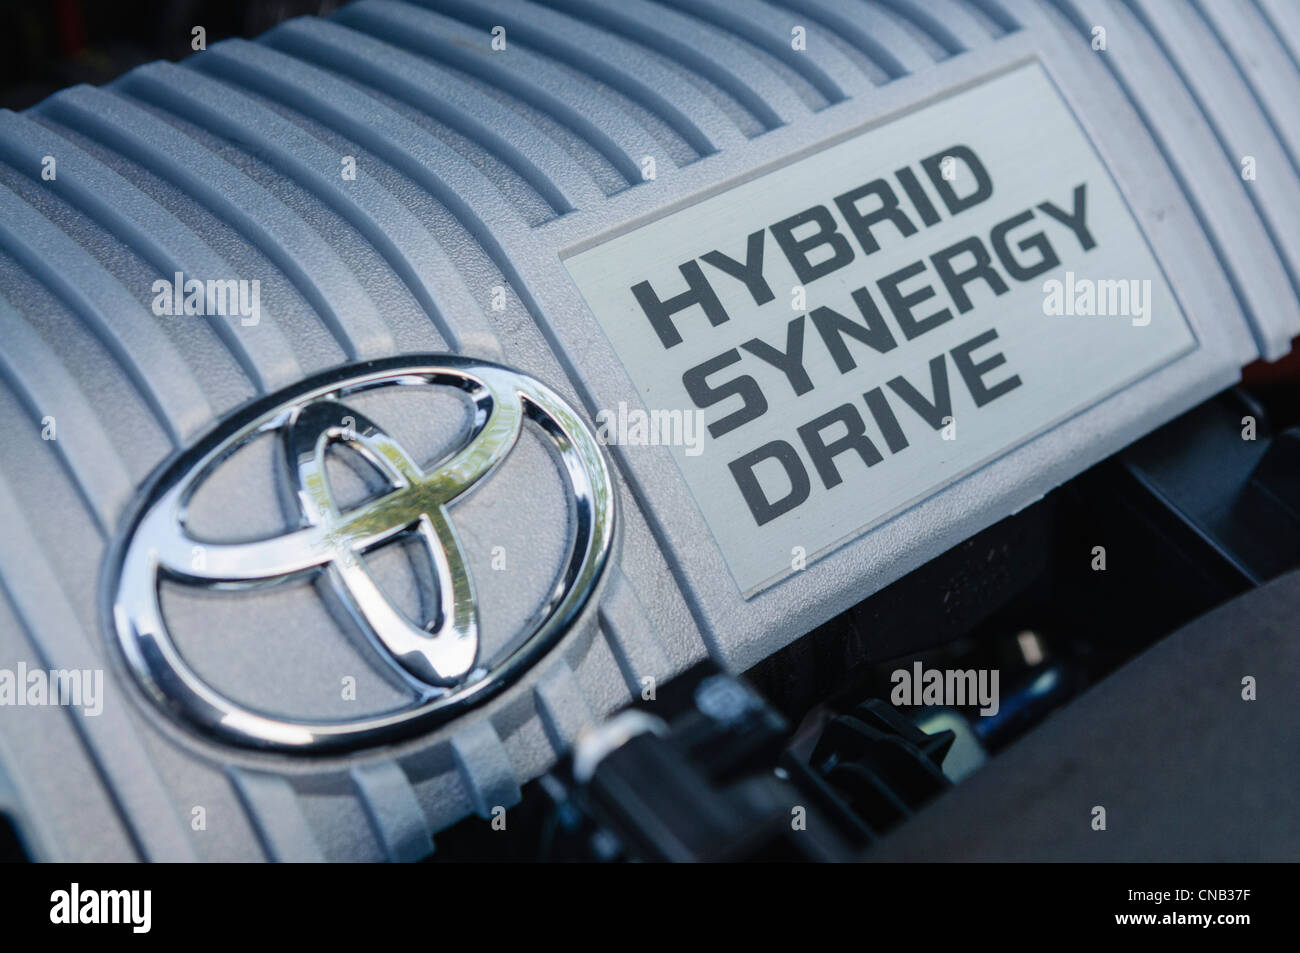 Hybrid petrol engine in a Toyota Prius Stock Photo